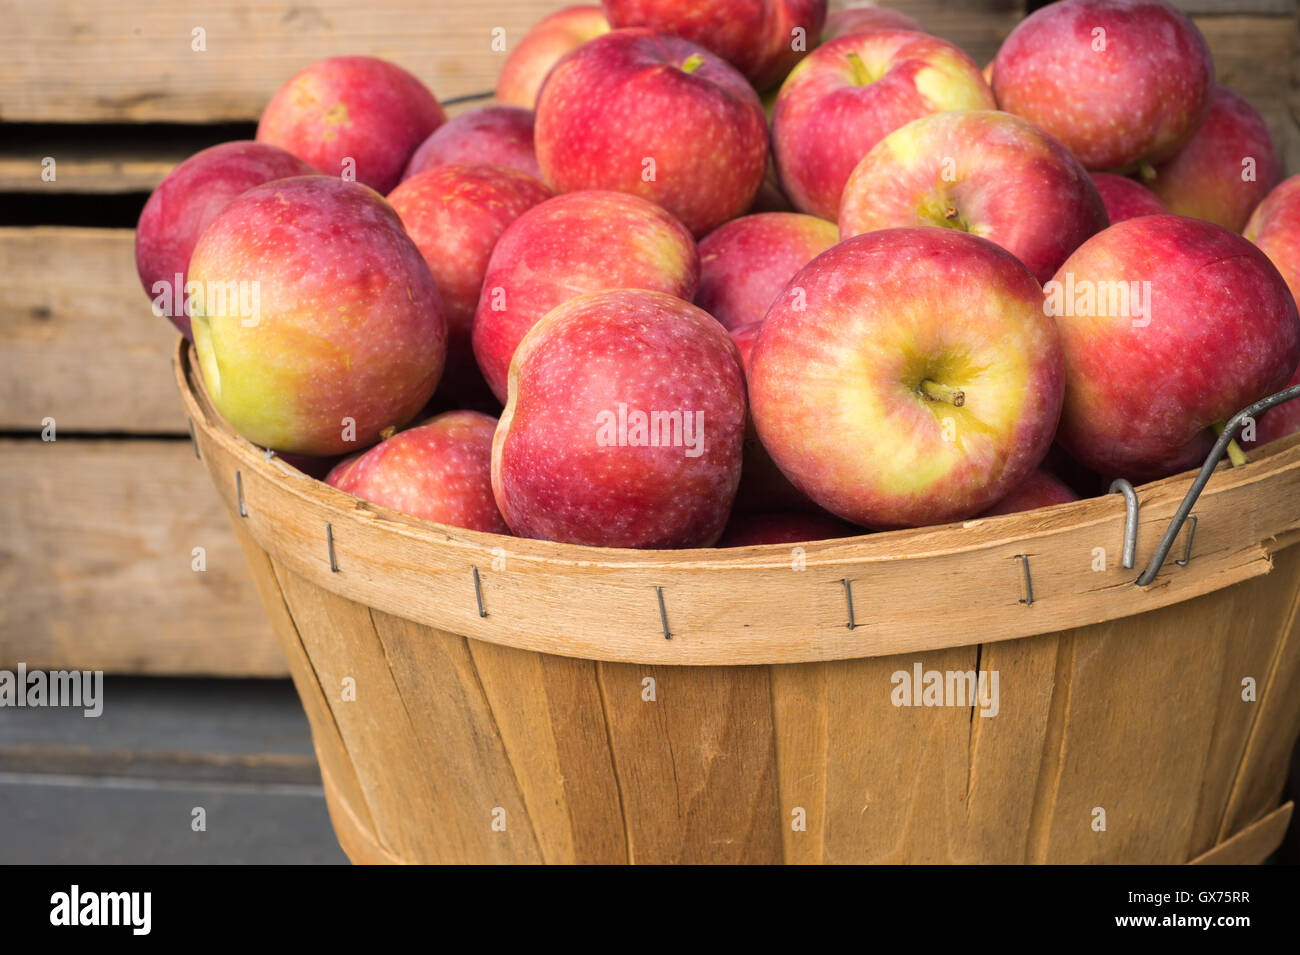 Lobo apples in a basket at the market Stock Photo